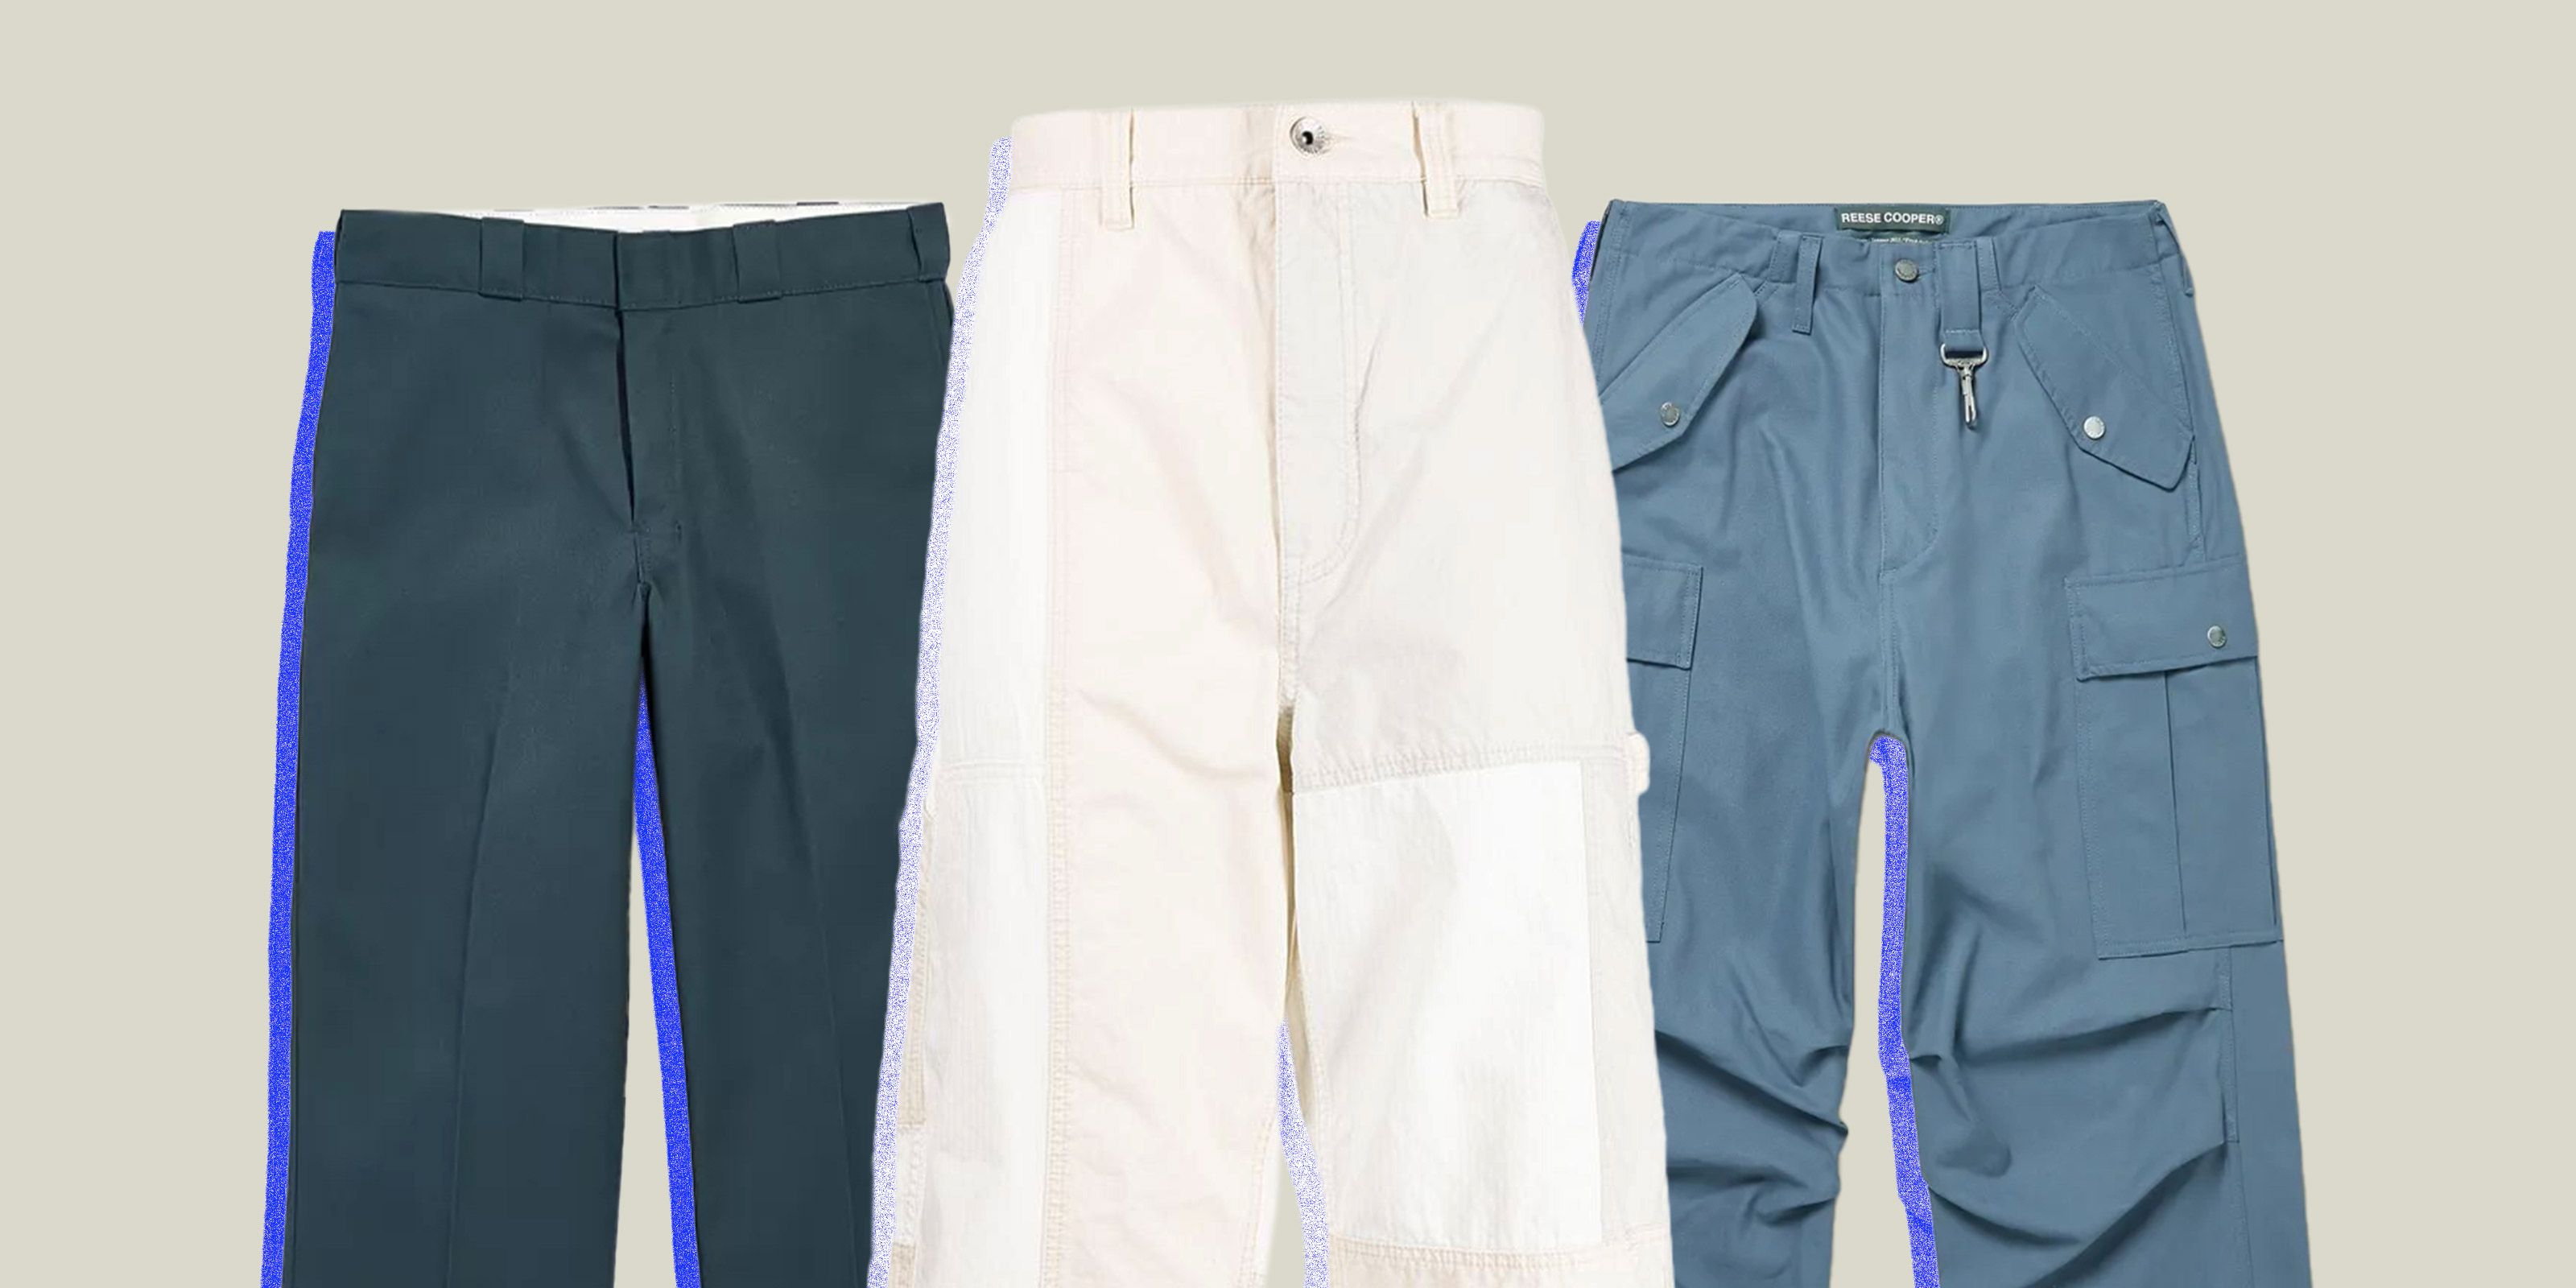 How To Wear WideLeg Pants For Men